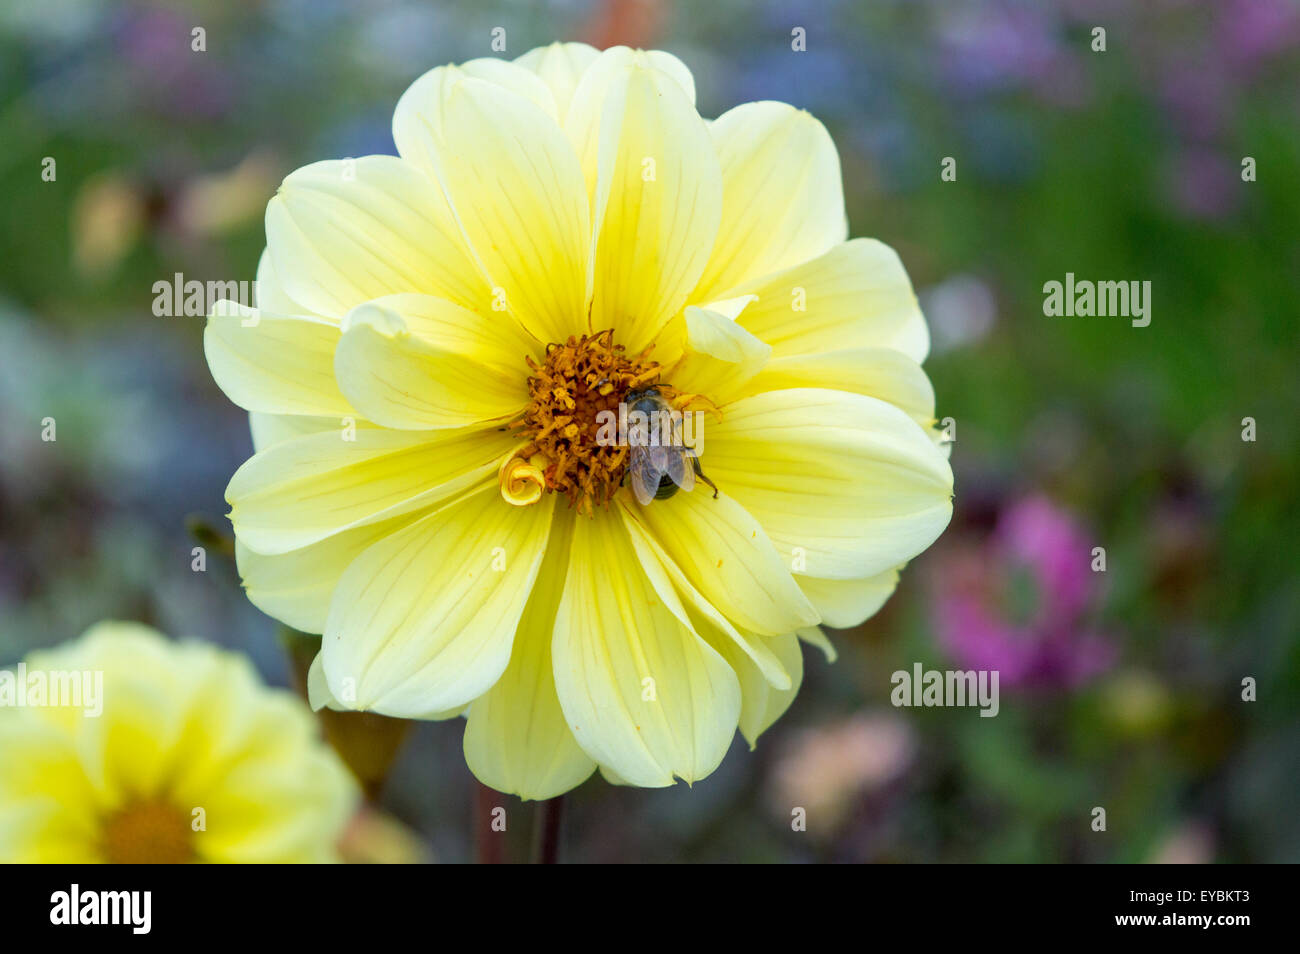 Beautiful yellow flower with a bee collecting nectar Stock Photo